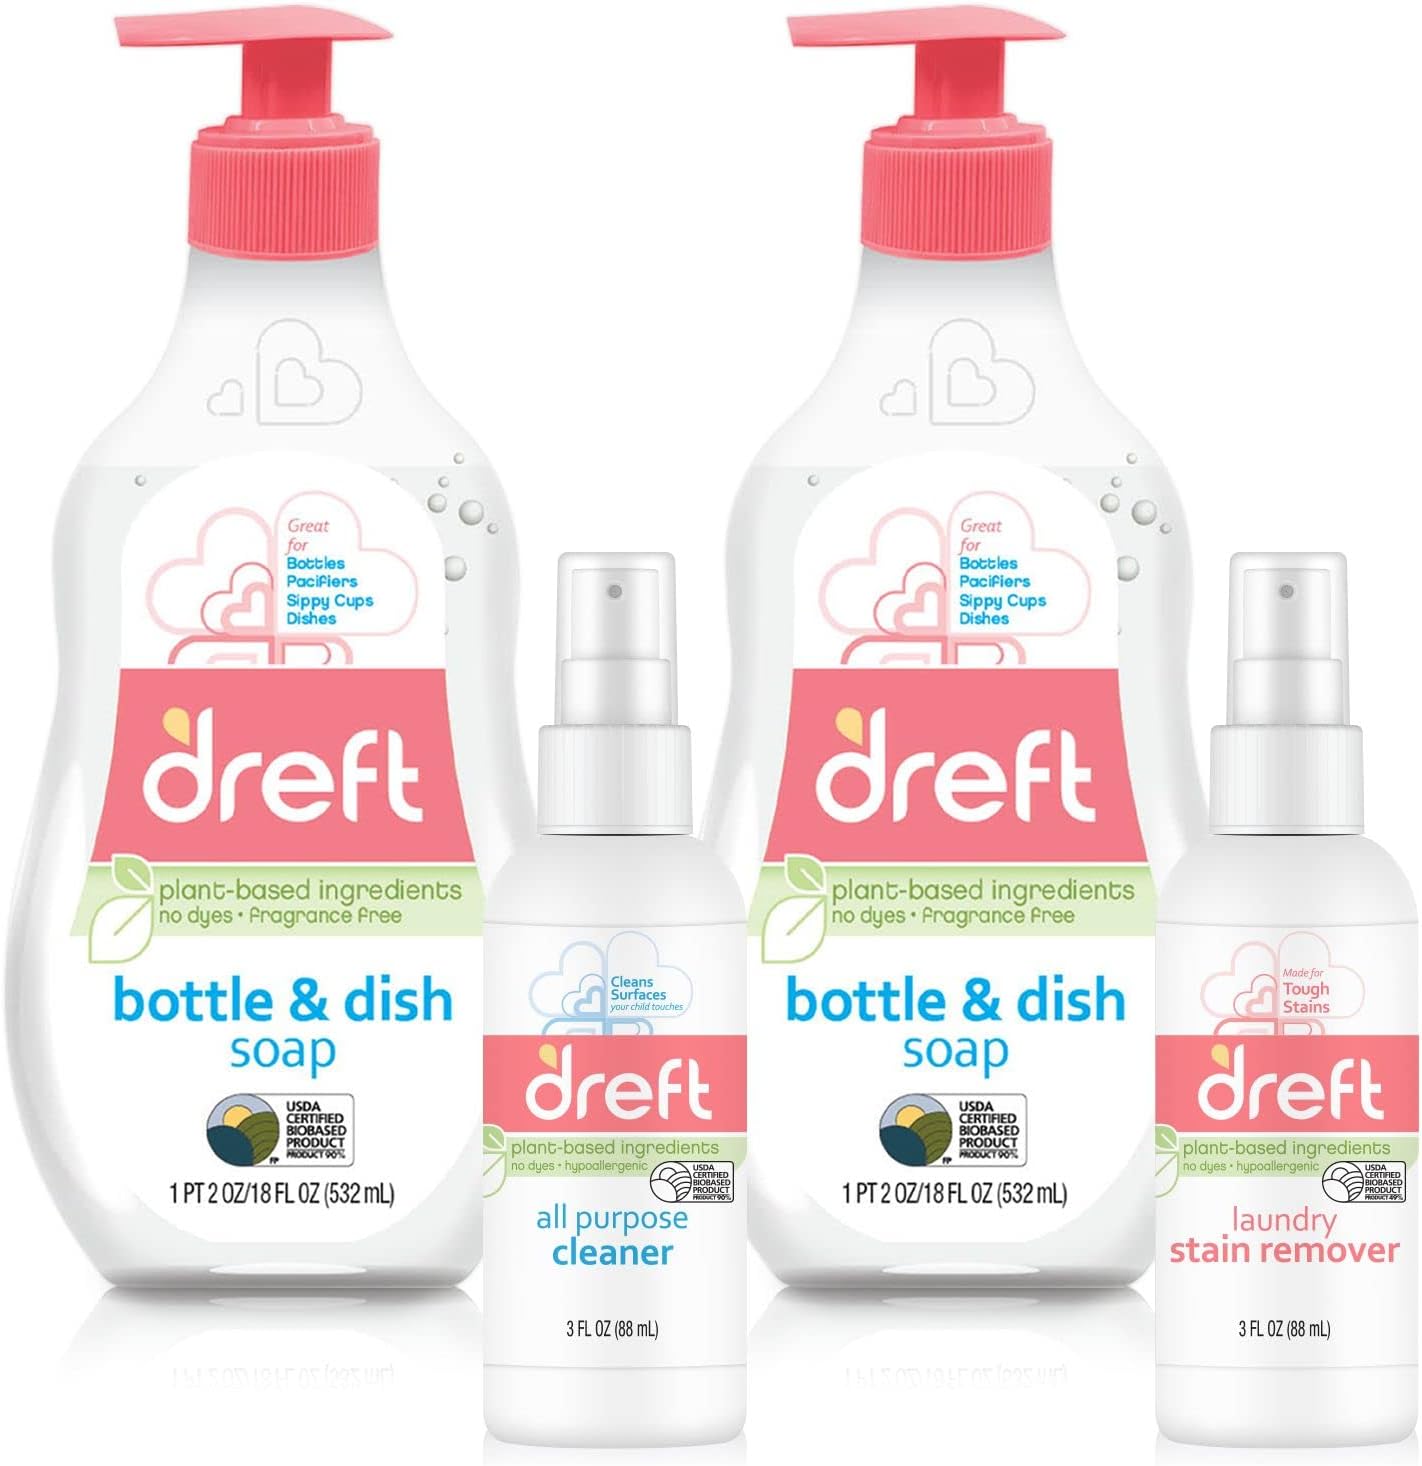 Dreft Bottle and Dish Soap Baby Gift Bundle, Plus Travel Size Dreft Stain Remover & All Purpose Cleaner Spray, Plant-Based Ingredients & Fragrance Free Formula, 4 Piece Set